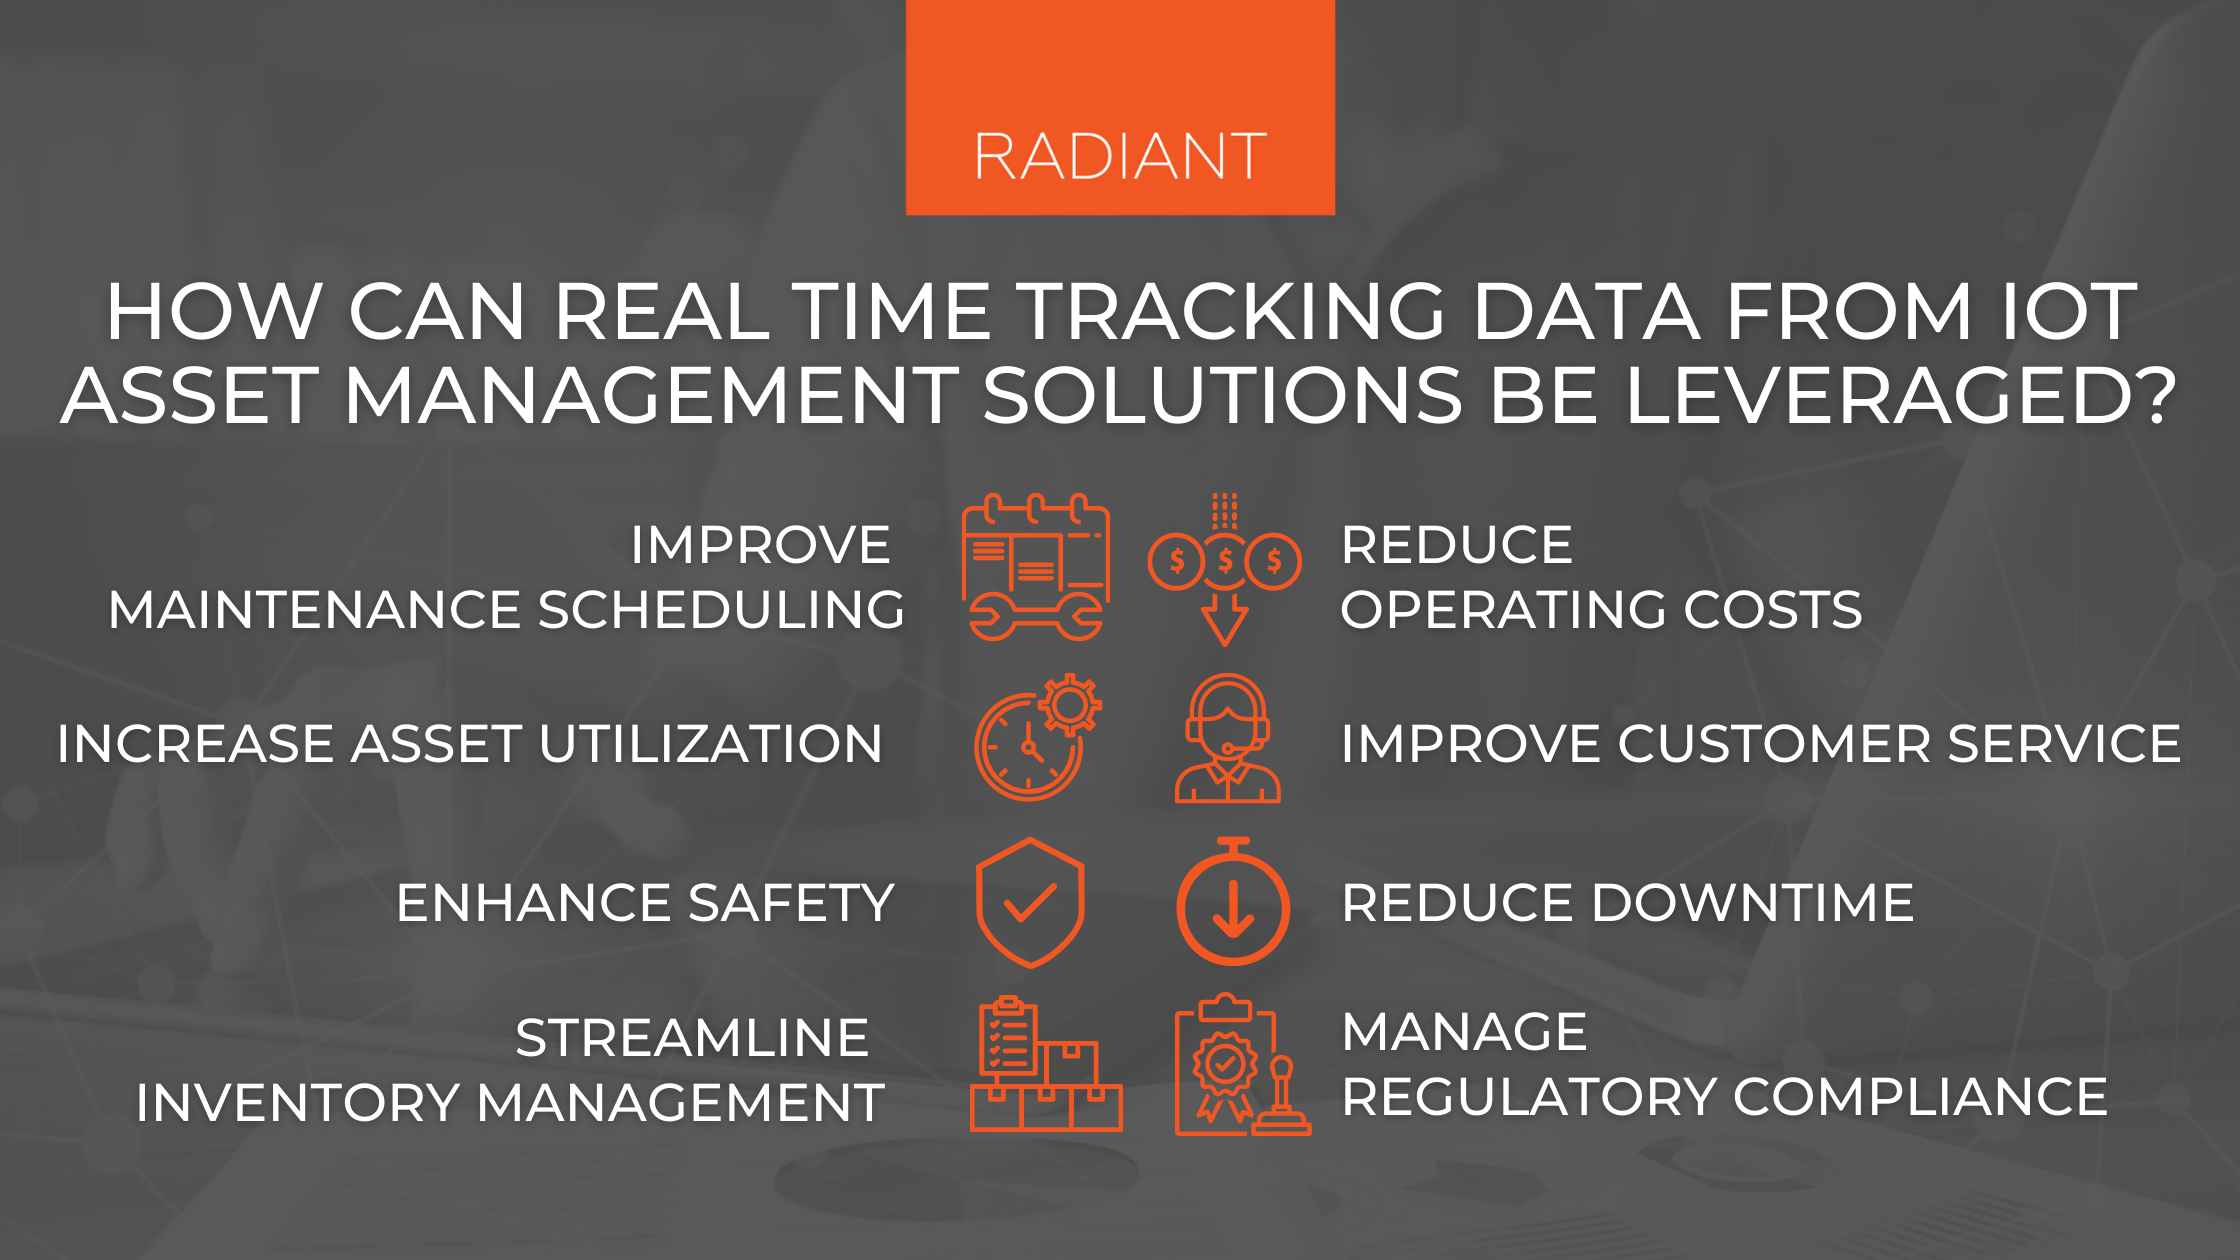 IoT Asset Management Solutions - Real Time Asset Management - Real Time Tracking - What Is Real Time Tracking - Real Time Location Tracking - Real Time Tracking System - Real Time Tracking Software - IoT Asset Management - IoT Asset Management Solution - IoT Asset Management Software - IoT Asset Management Systems - IoT Asset Management System - IoT Asset Tracking - Real Time Asset Tracking